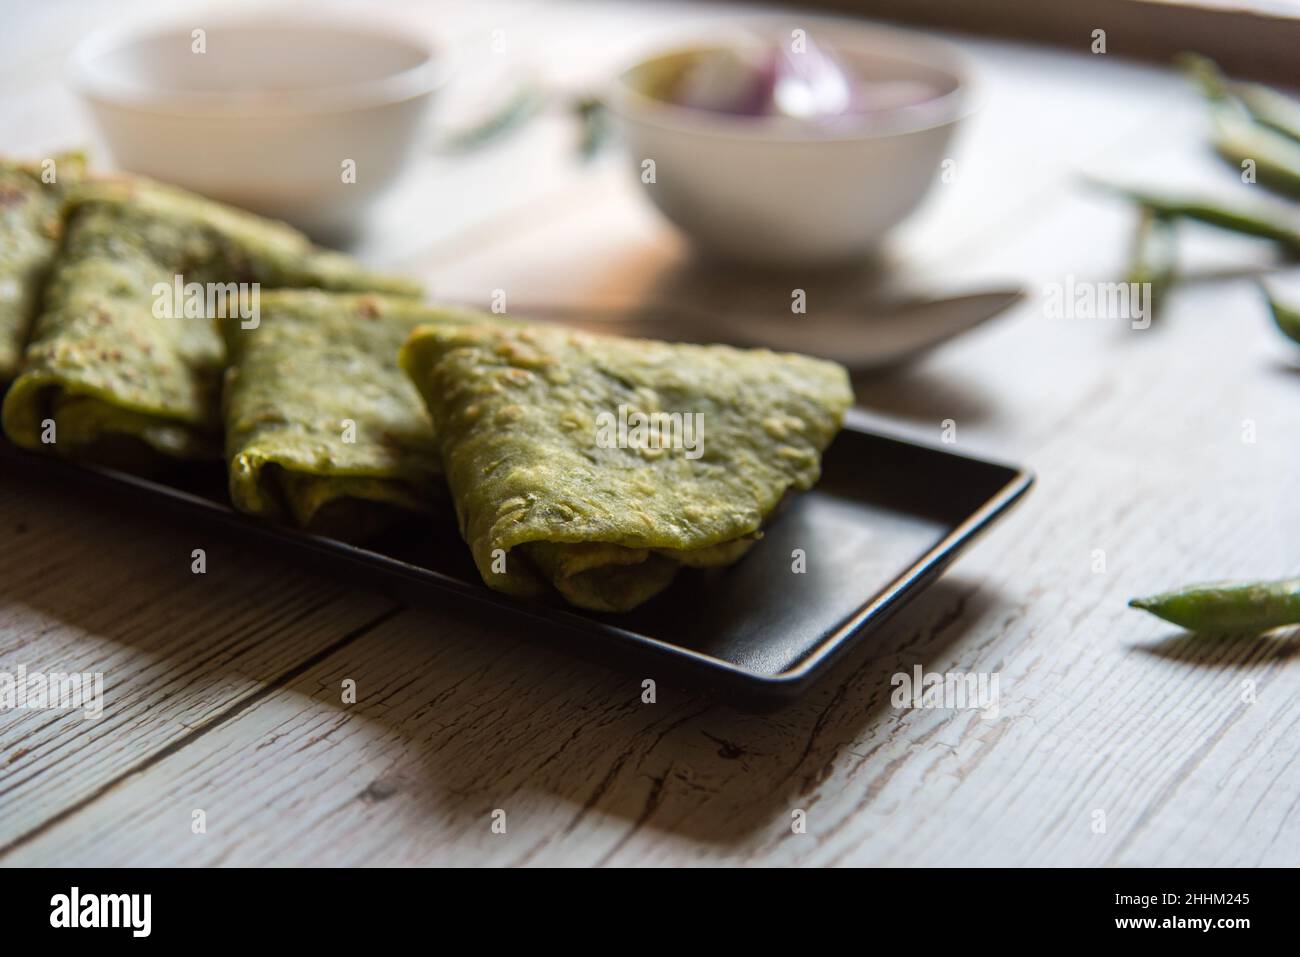 Close up of green peas kachori or Indian flat bread with use of selective focus Stock Photo